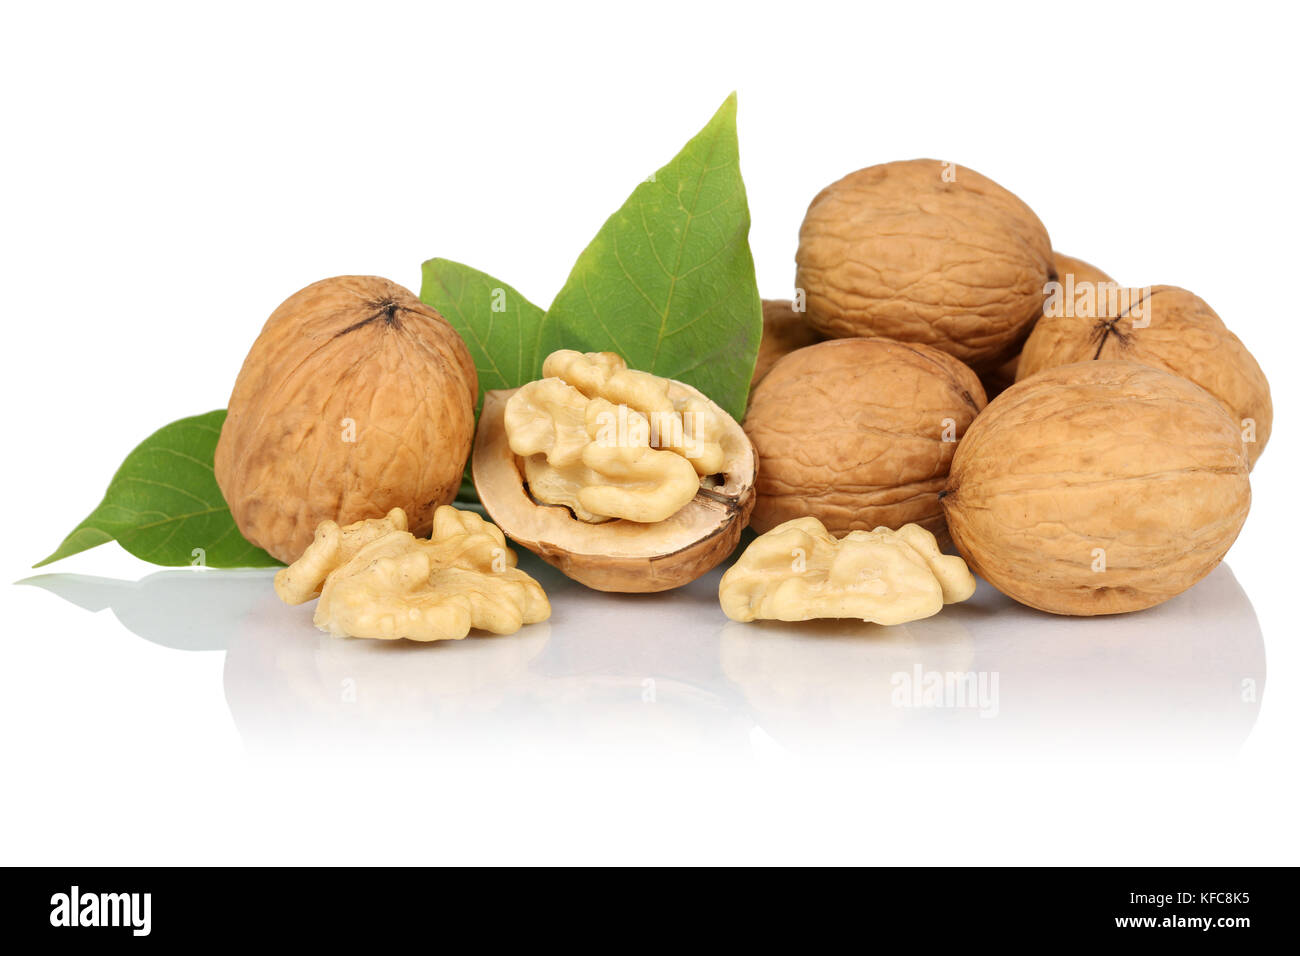 Walnuts walnut nuts nut nutshell isolated on a white background Stock Photo